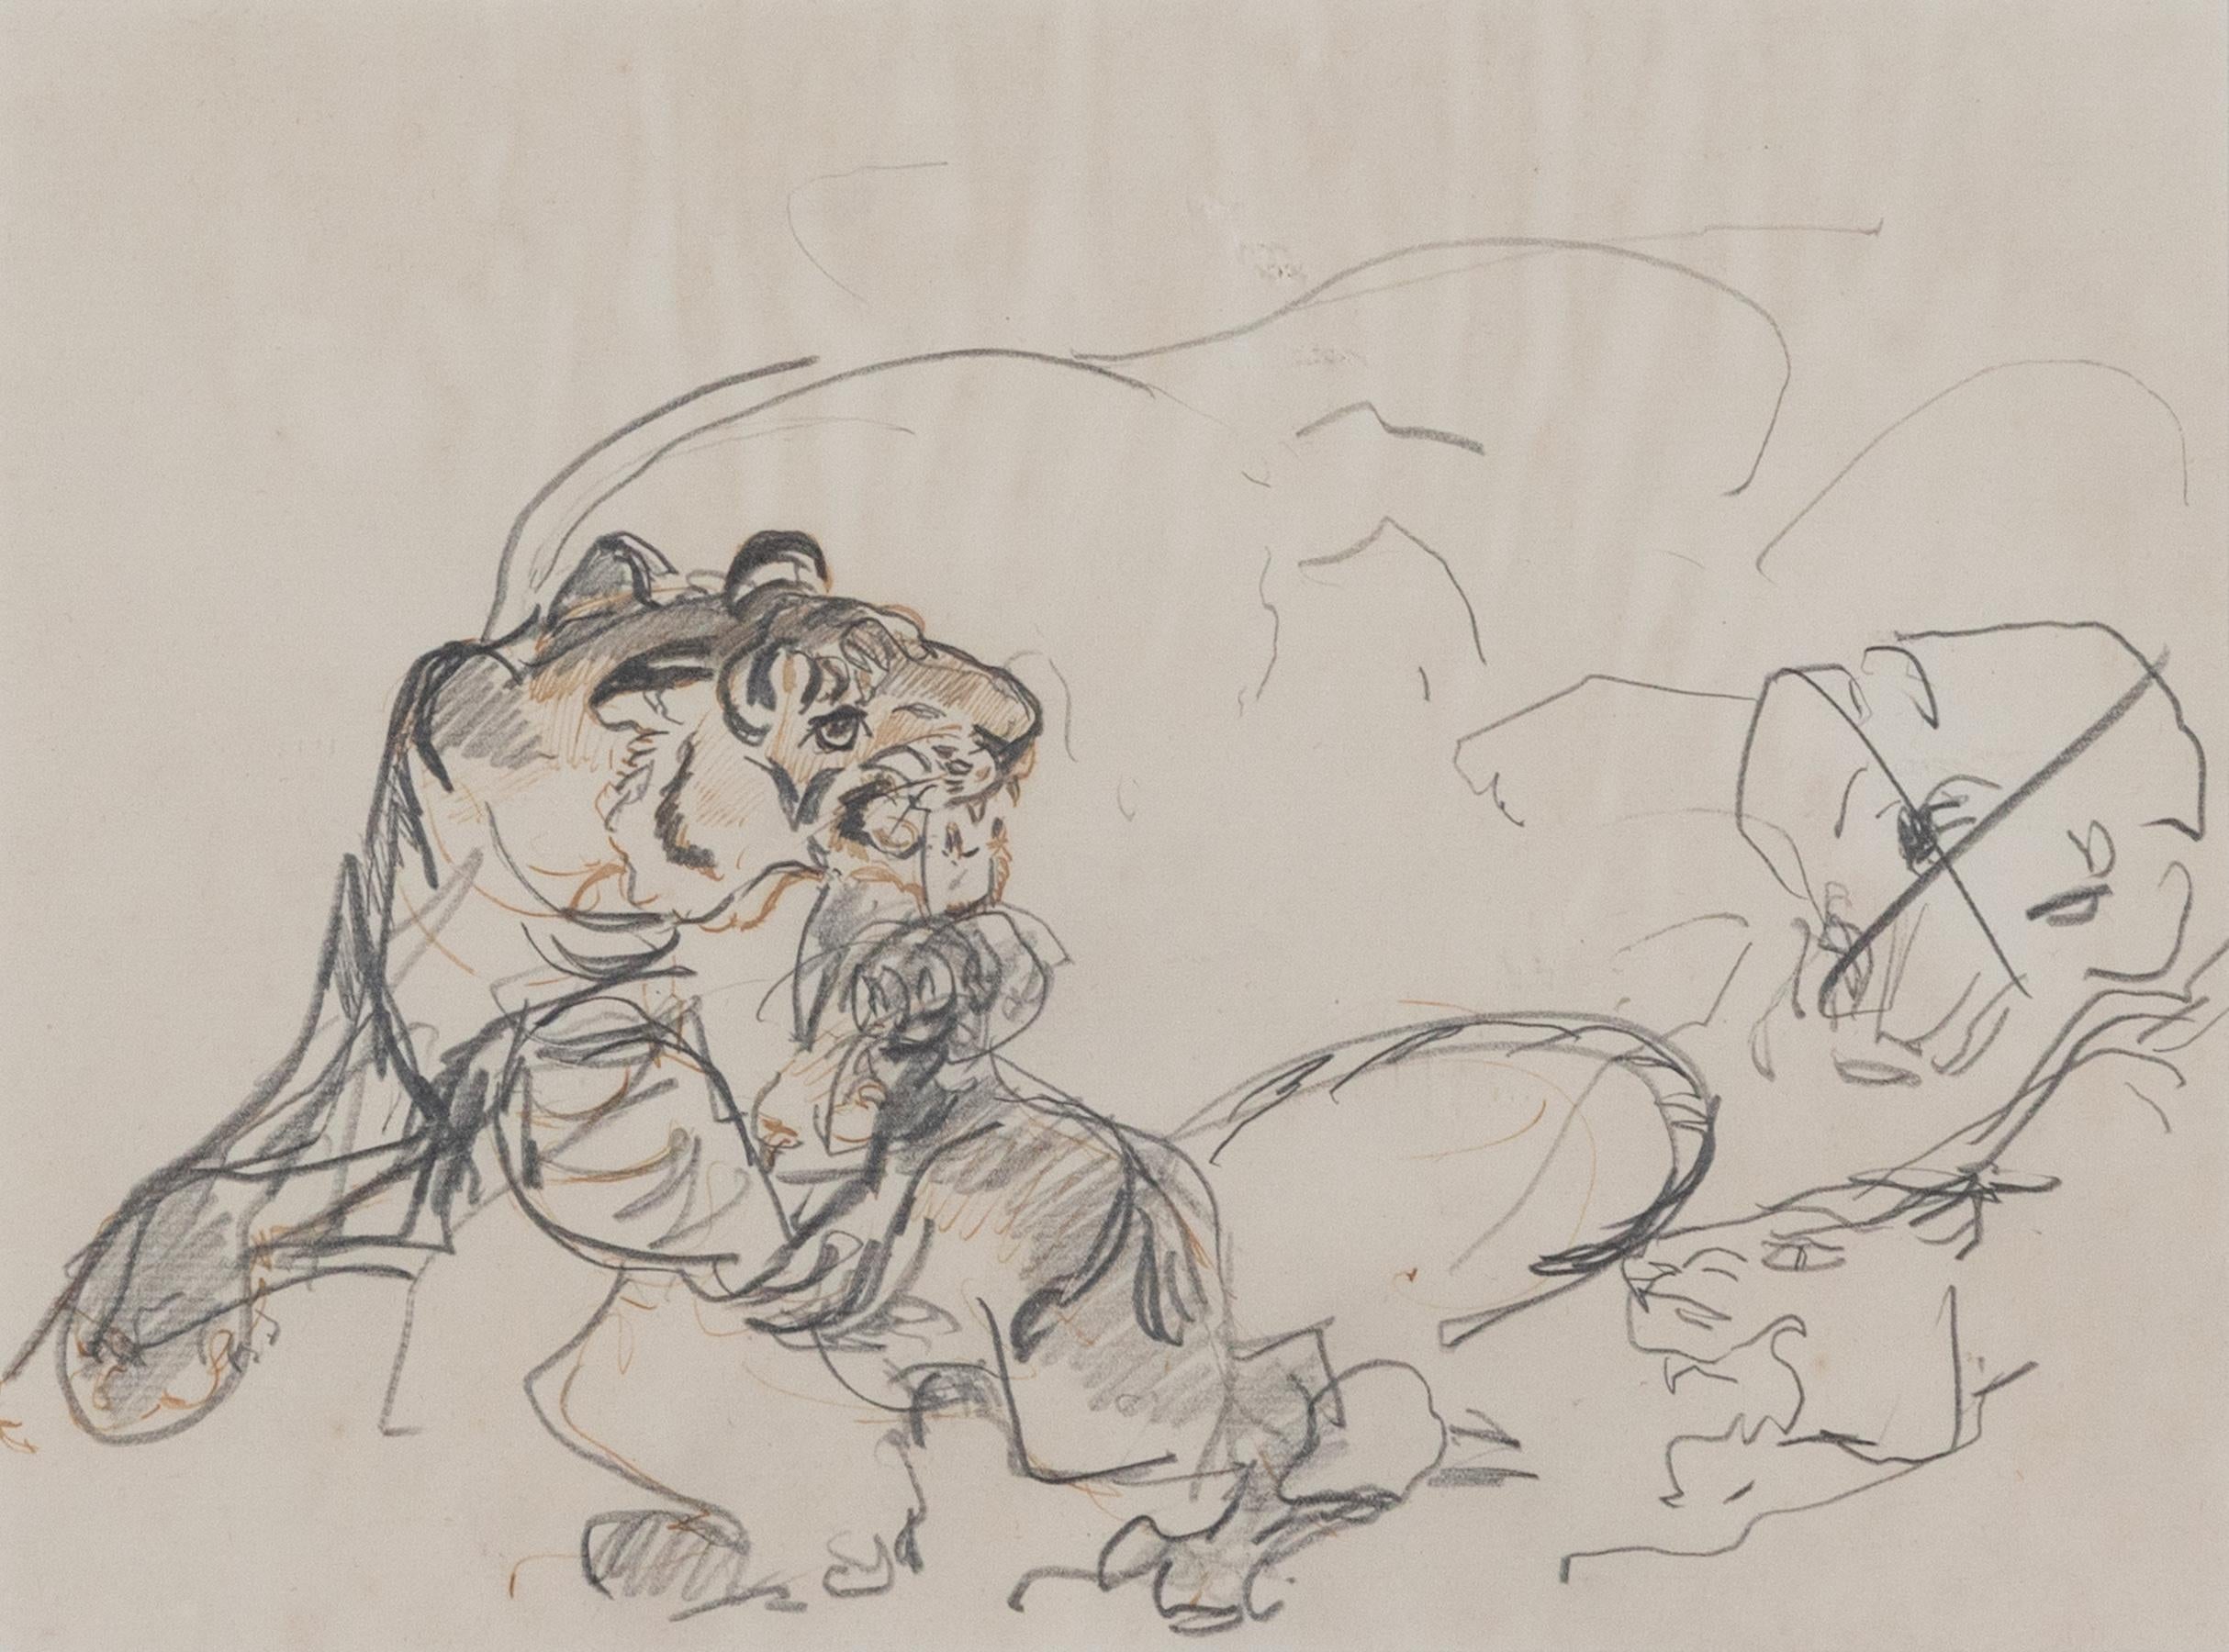 Pouncing Tiger by Orovida Pissarro (1893-1968)
Ink and pencil on paper
18.1 x 25.7 cm (7 ⅛ x 10 ⅛ inches)
Executed circa 1917

Artist biography:
Orovida Camille Pissarro, Lucien and Esther Pissarro’s only child, was the first woman in the Pissarro